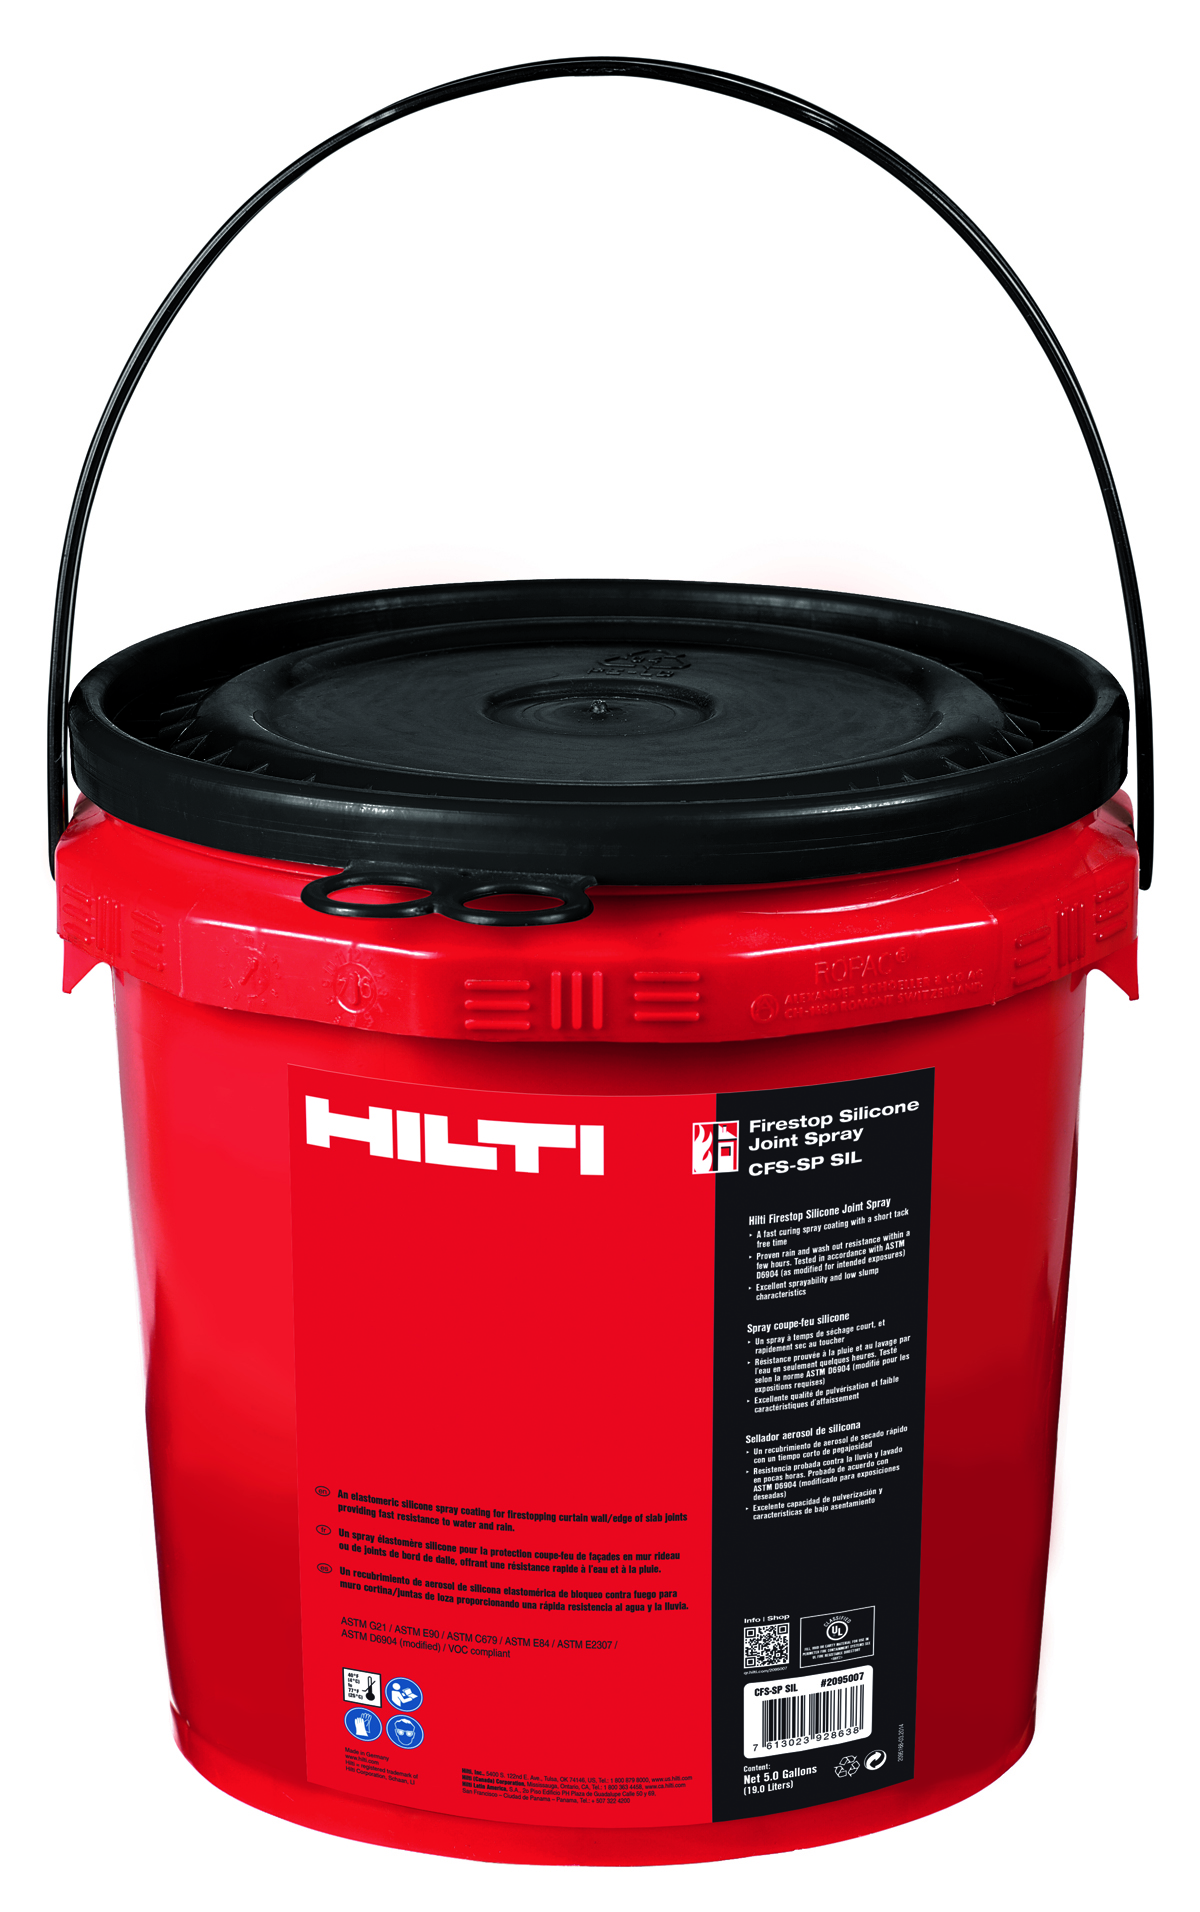 Hilti, a leading manufacturer and supplier of specialized tools and fastening systems for the professional user, announces a new silicone joint spray. 